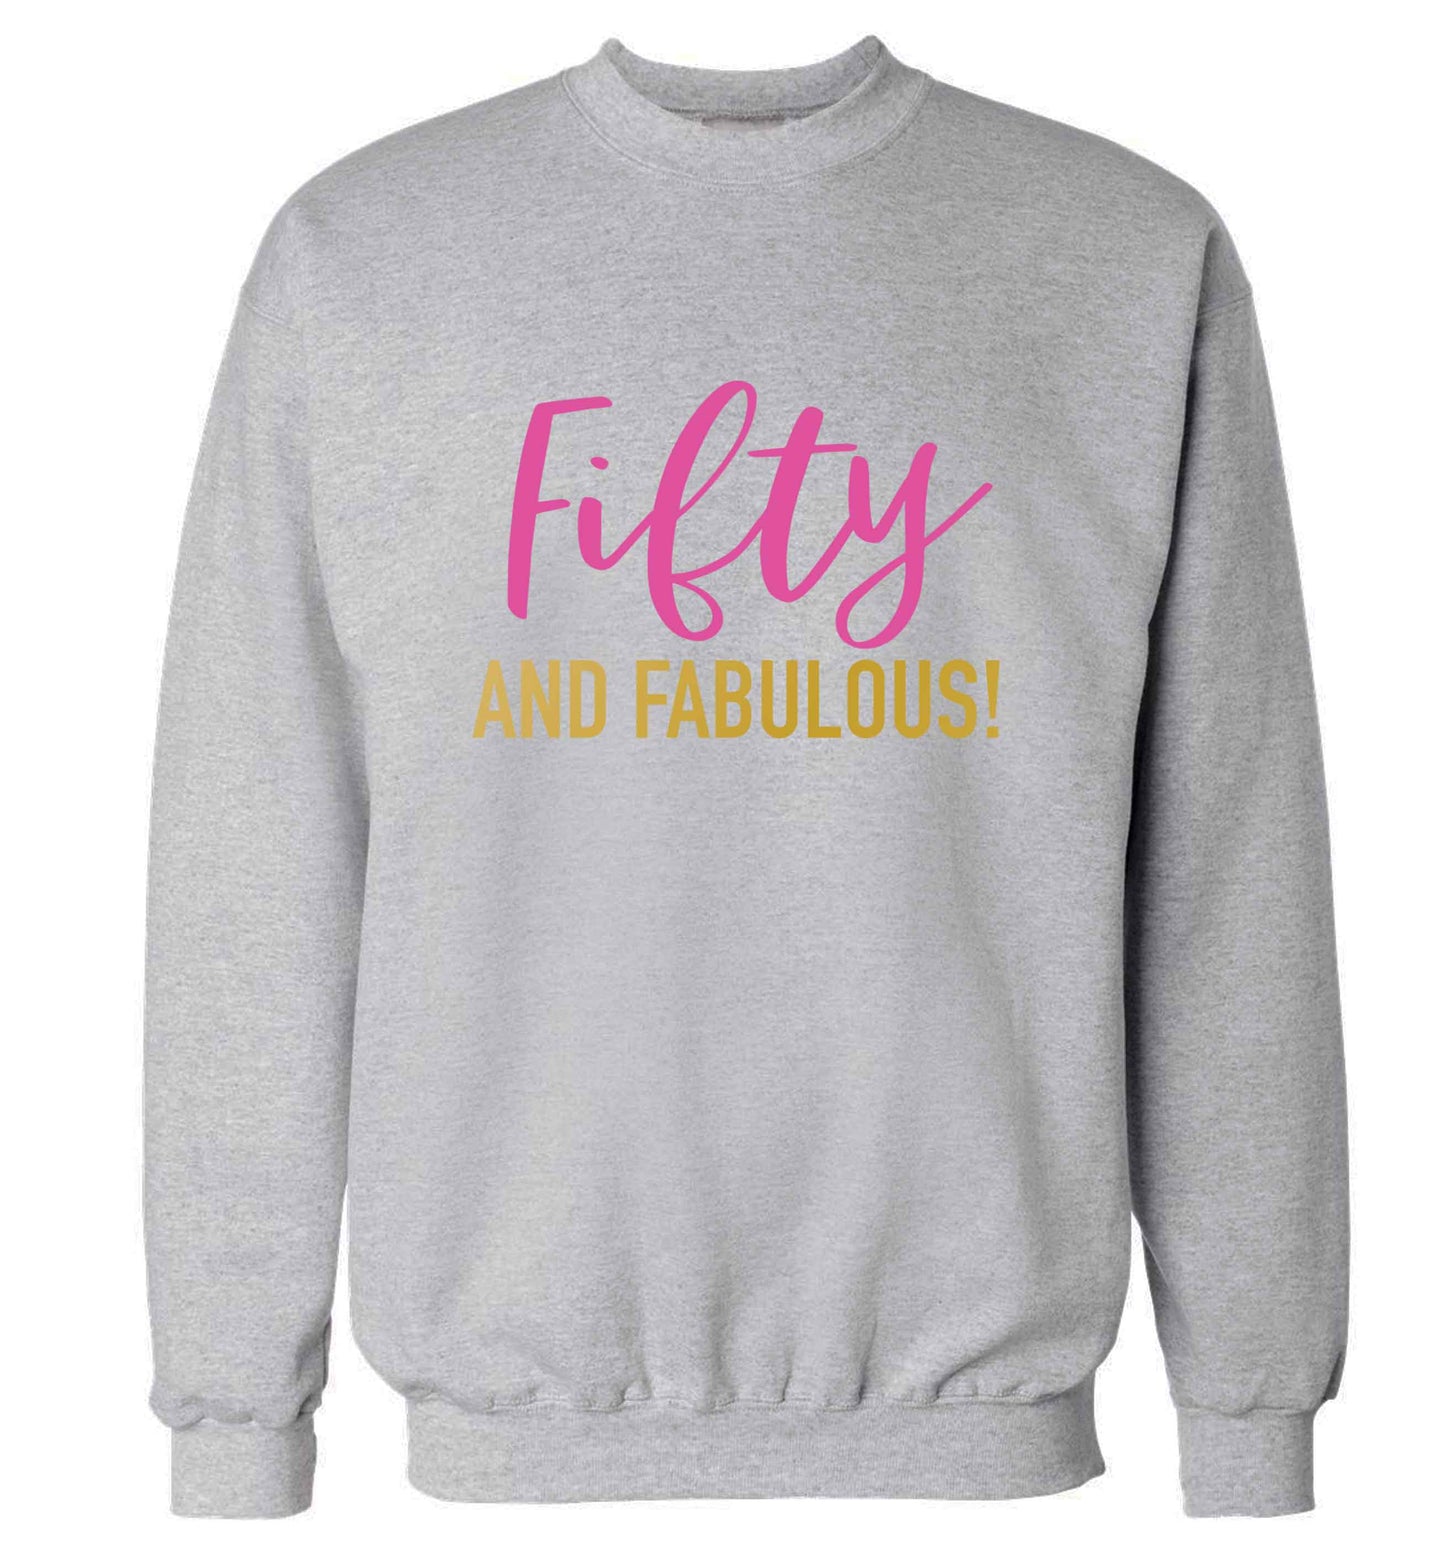 Fifty and fabulous adult's unisex grey sweater 2XL